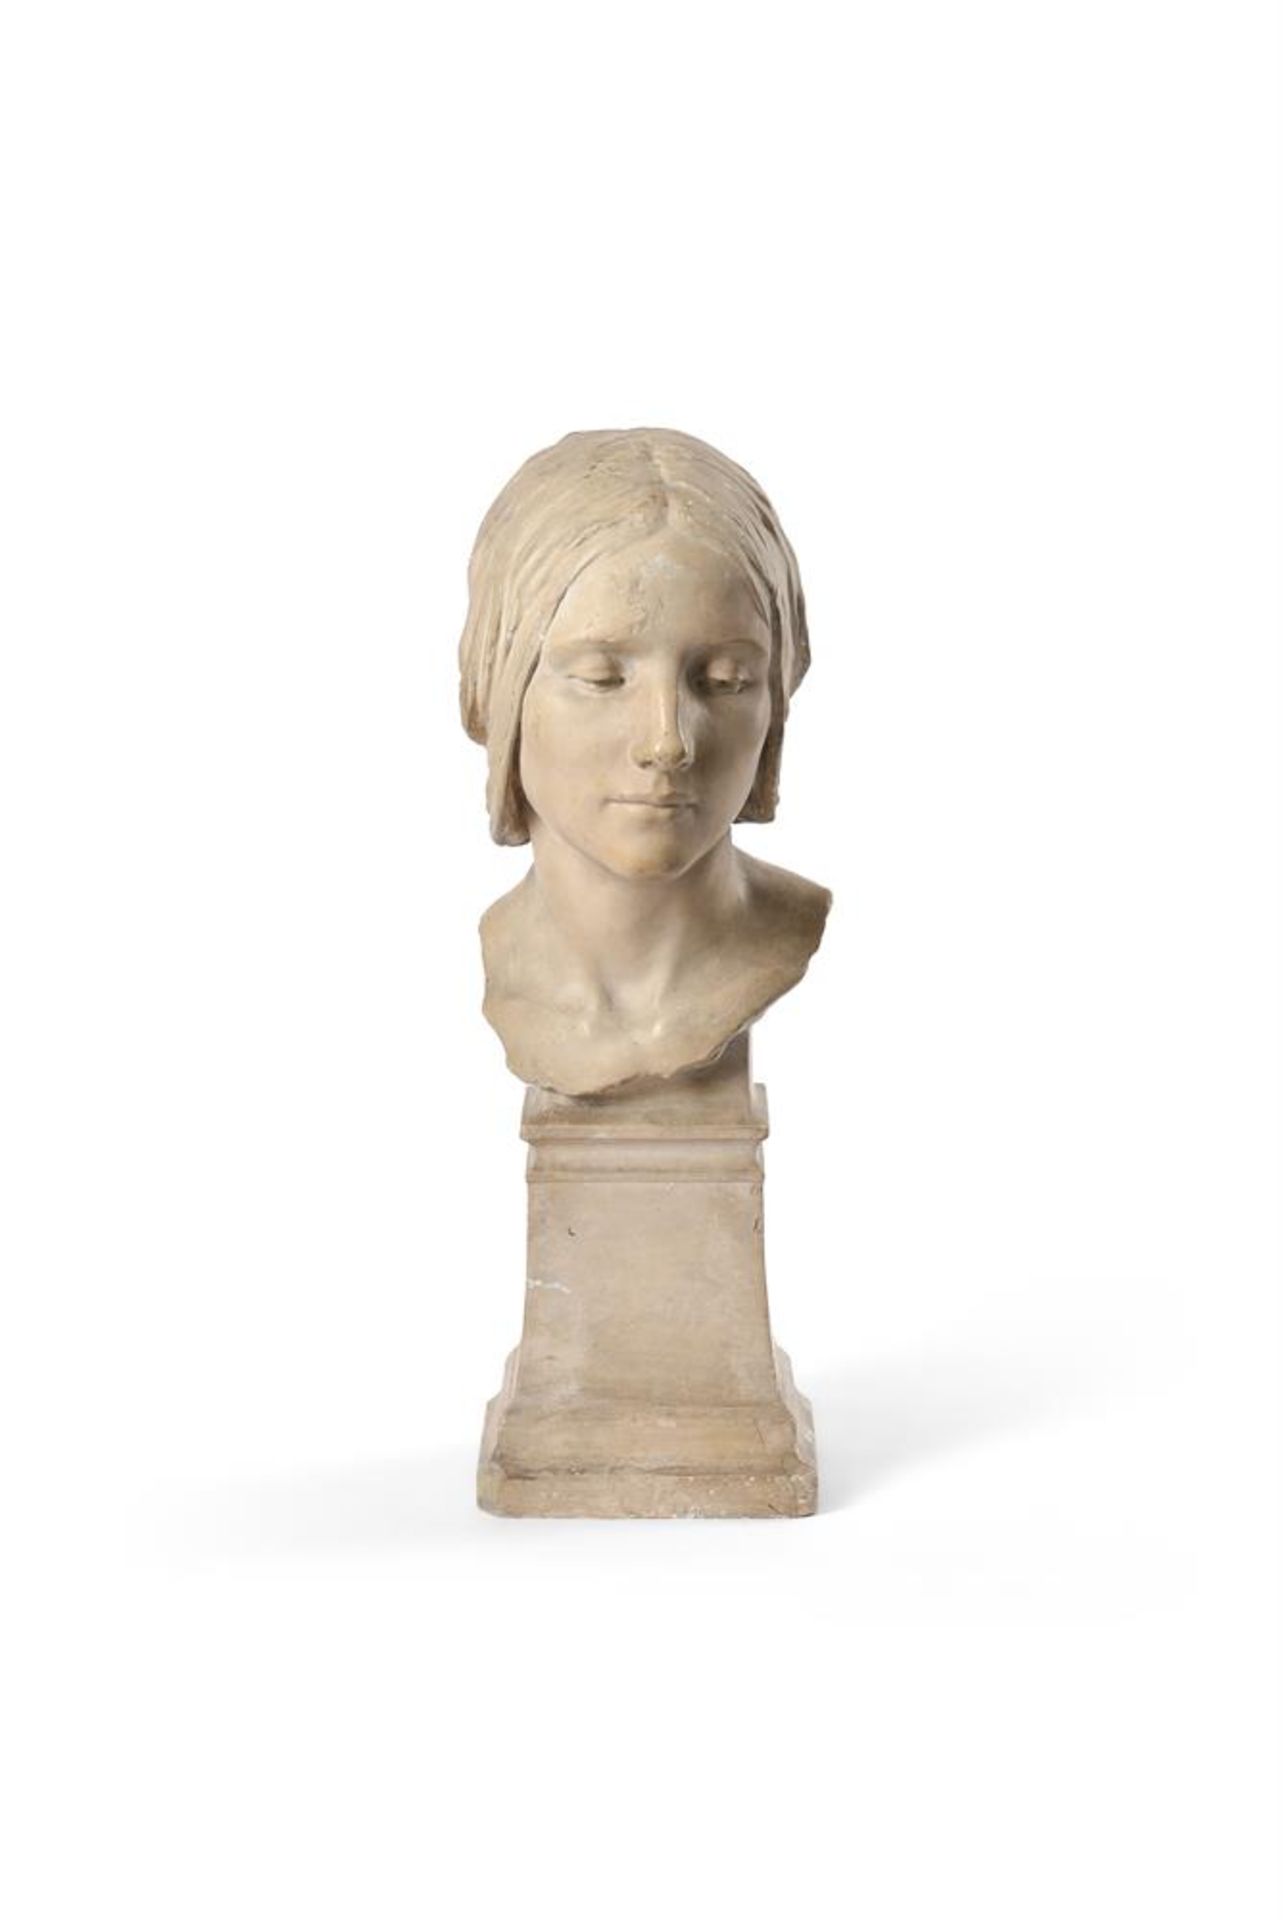 AFTER FREDERICK JAMES HALNON (BRITISH, 1881-1958), A PLASTER BUST, EARLY 20TH CENTURY